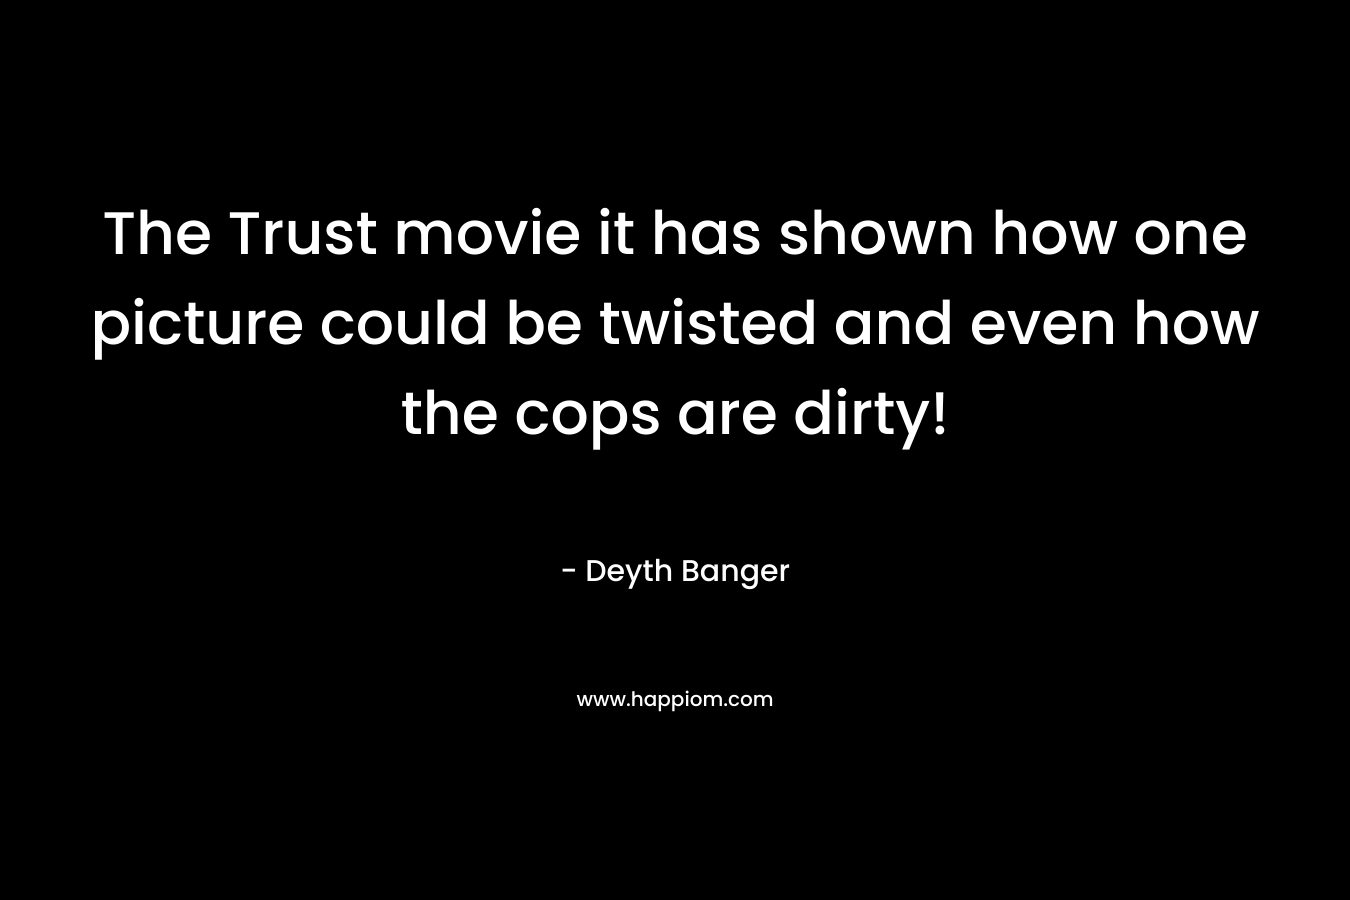 The Trust movie it has shown how one picture could be twisted and even how the cops are dirty!